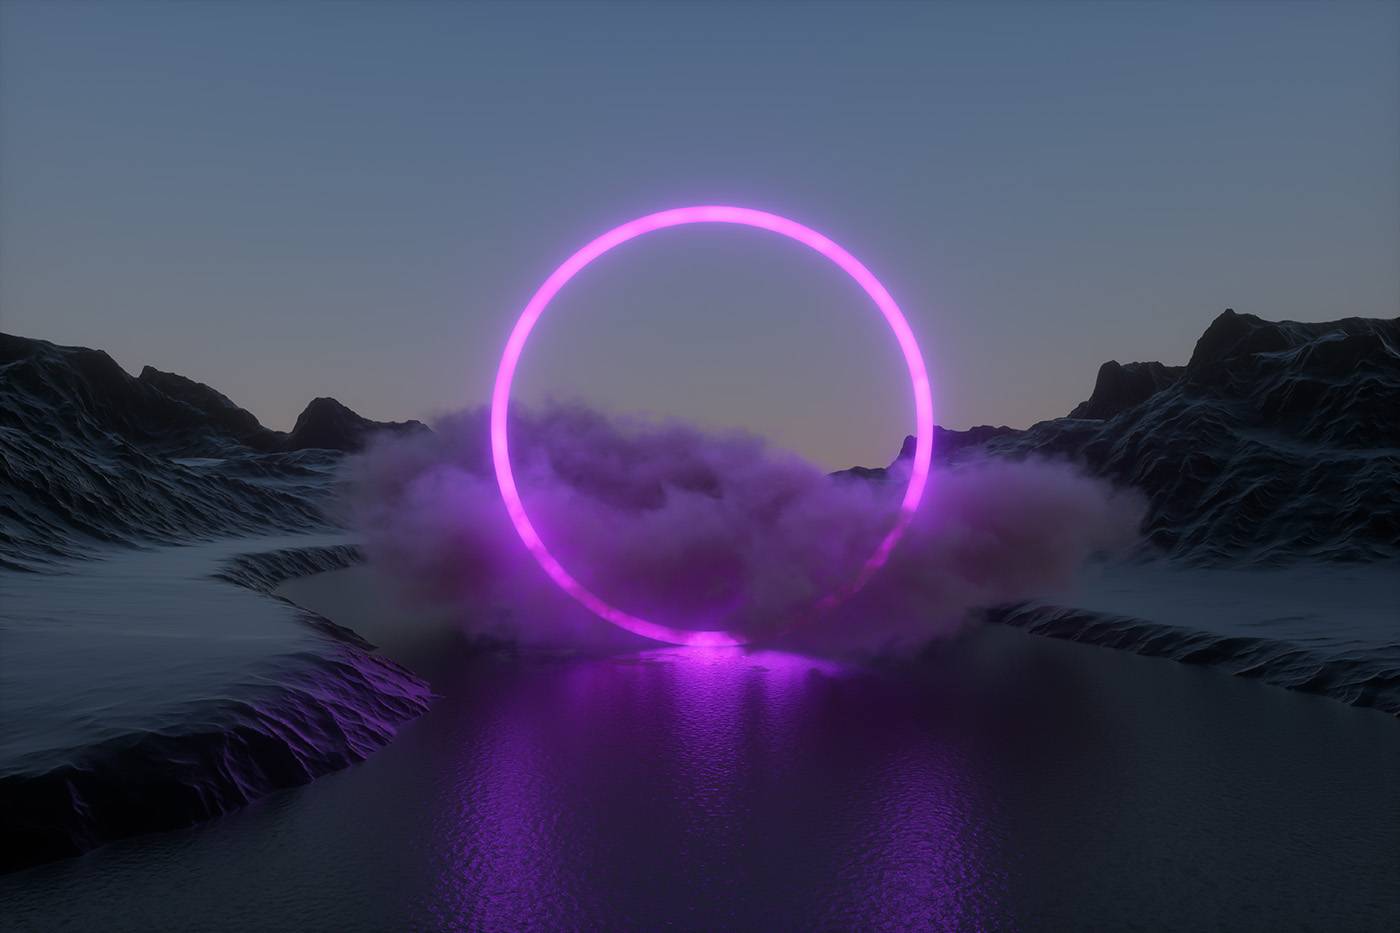 River with torus neon light in the water surrounded by cloud in a nature landscape